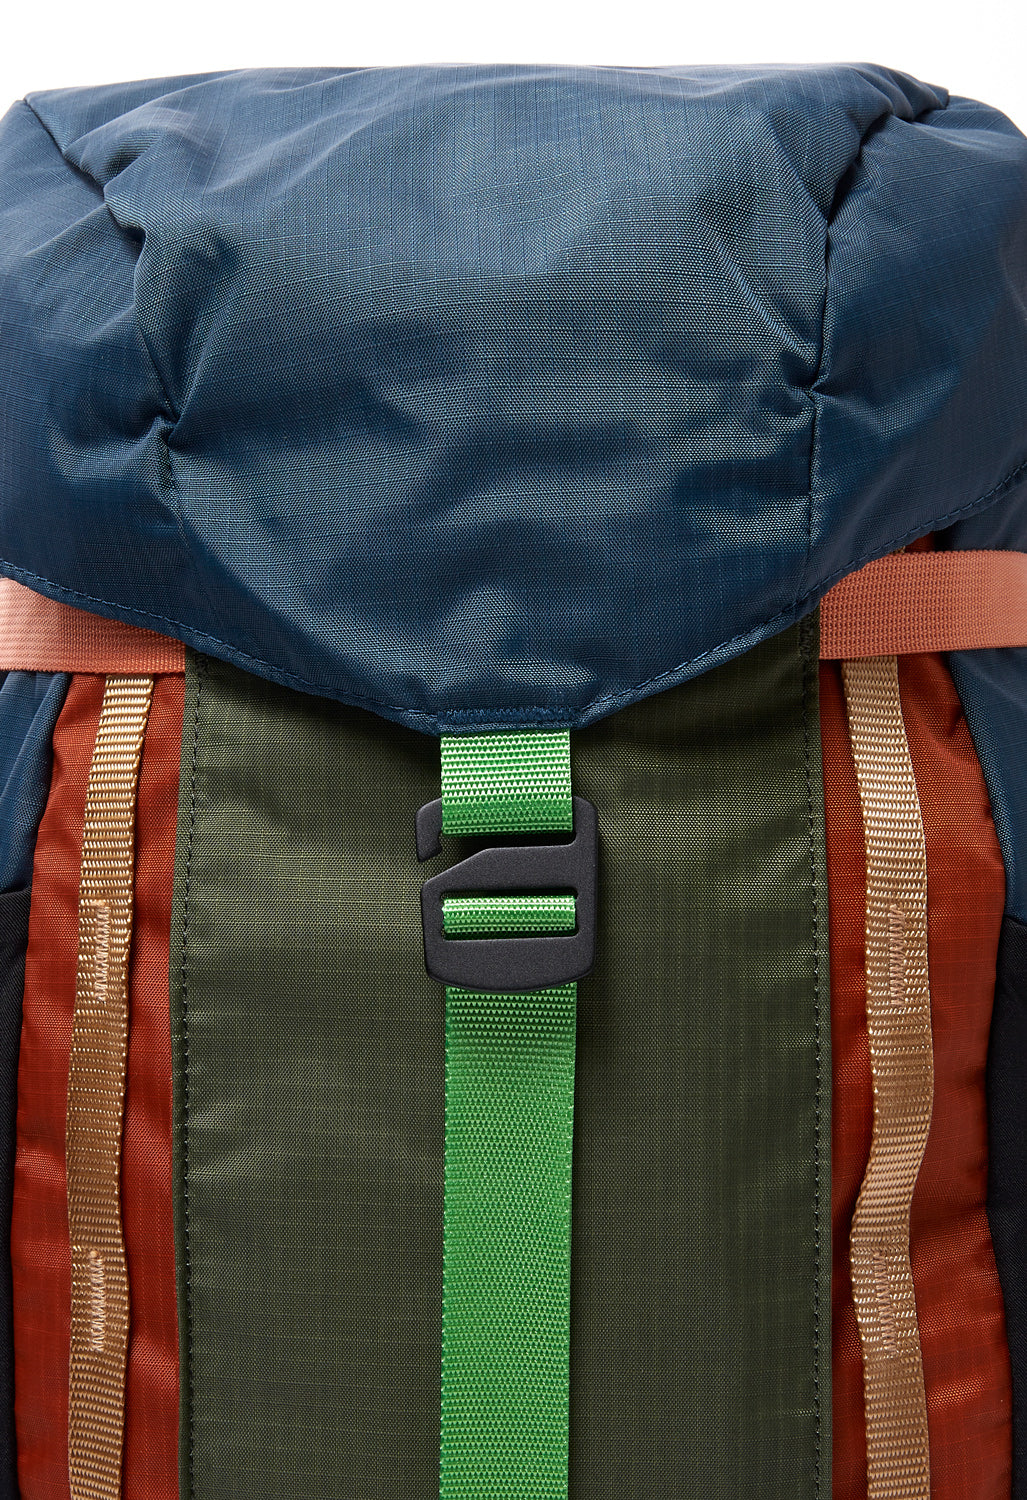 Topo Designs Mountain Pack 16L - Pond Blue / Olive